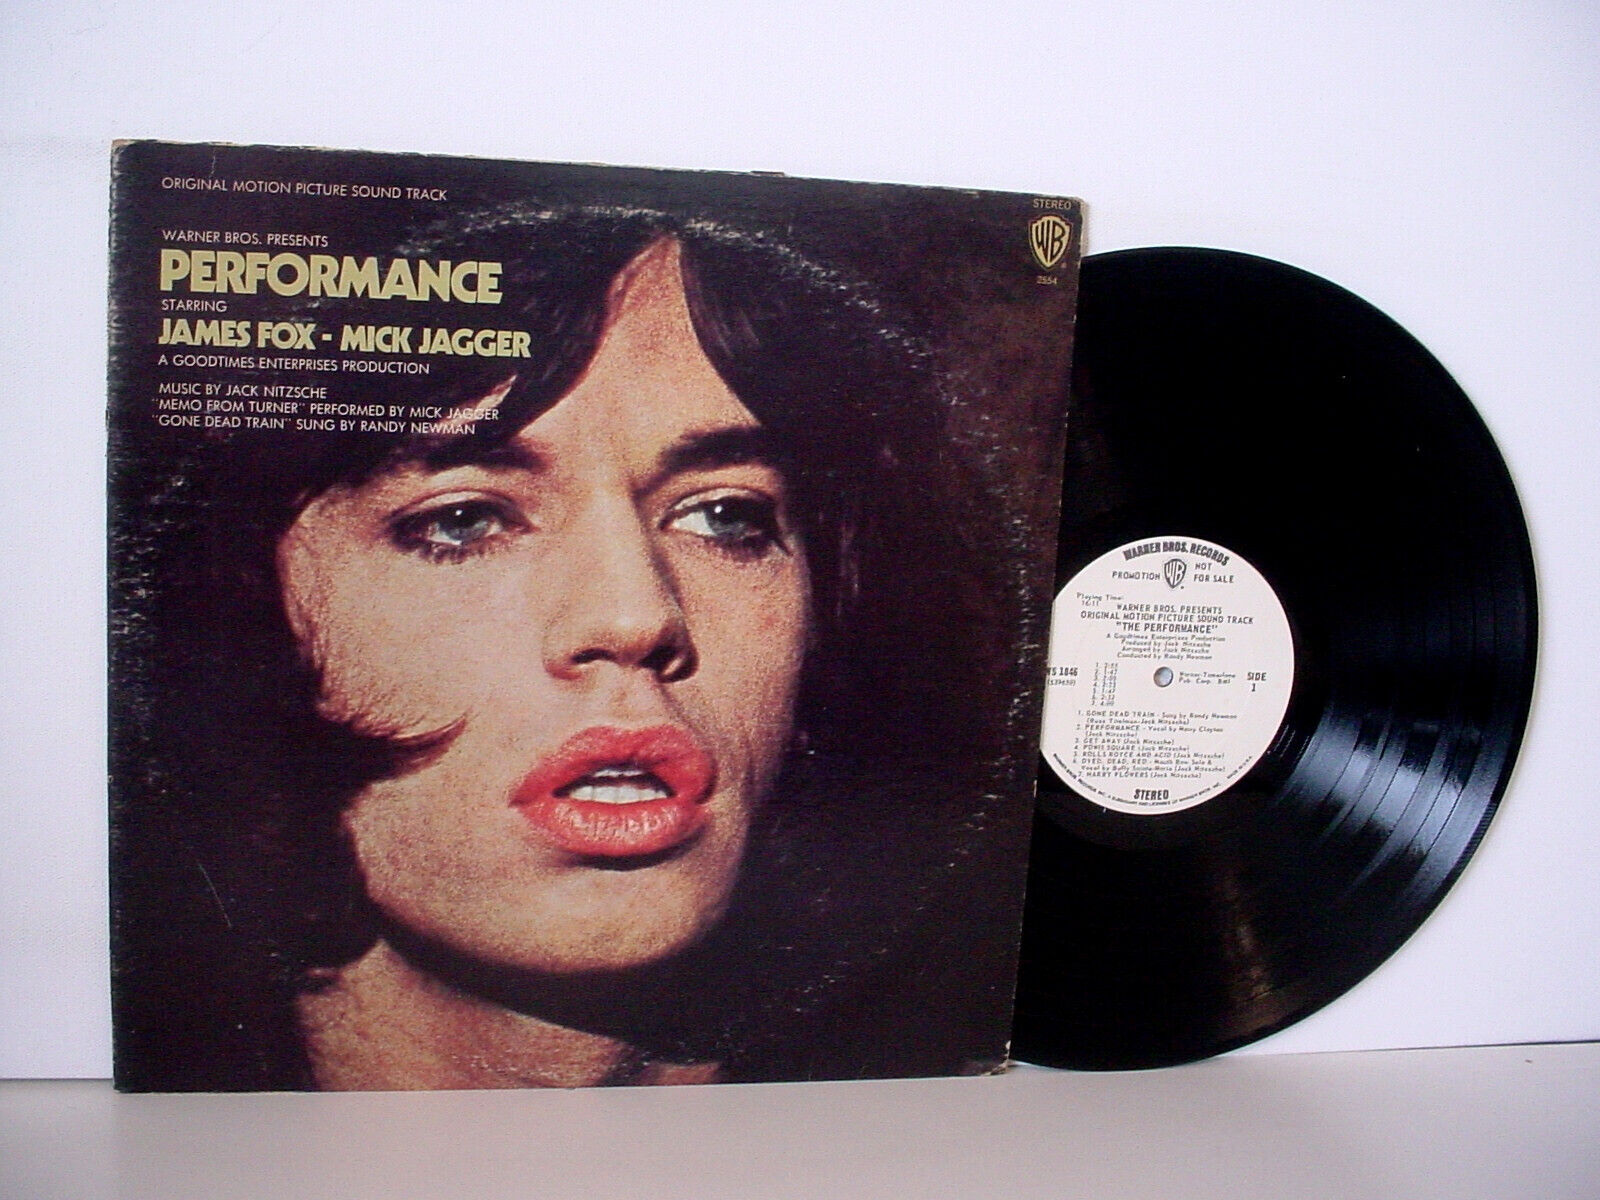 PERFROMANCE WHITE LABEL PROMO 1970 WB BS 2554 Mick Jagger Randy Newman Ry Cooder